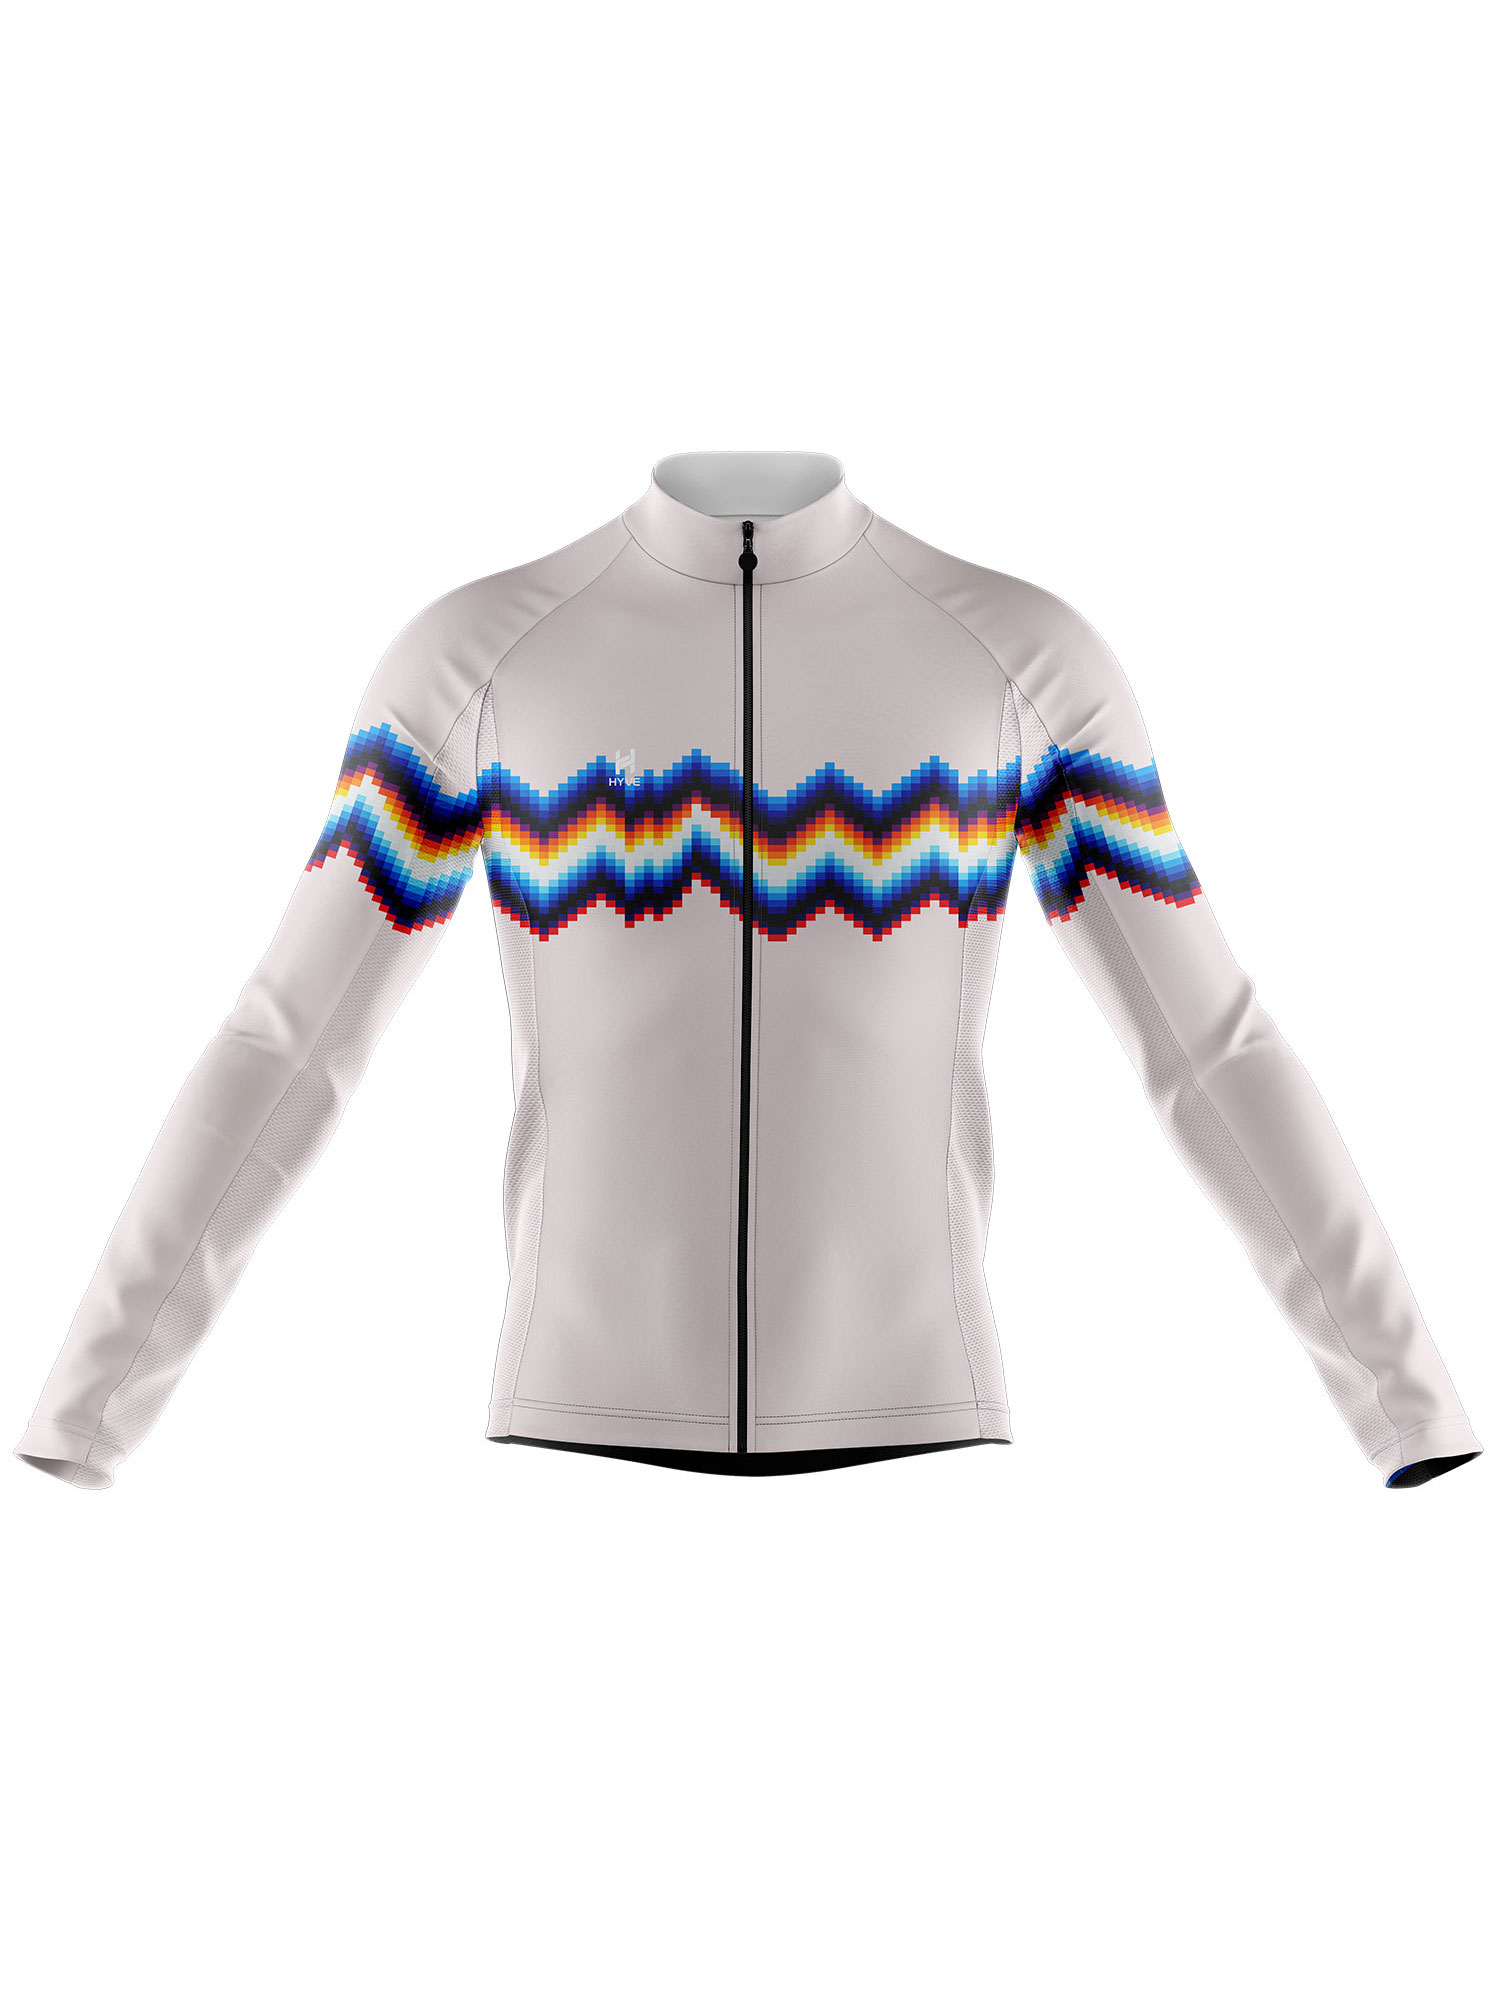 Men's Winter Cycling Jersey for Cold Weather